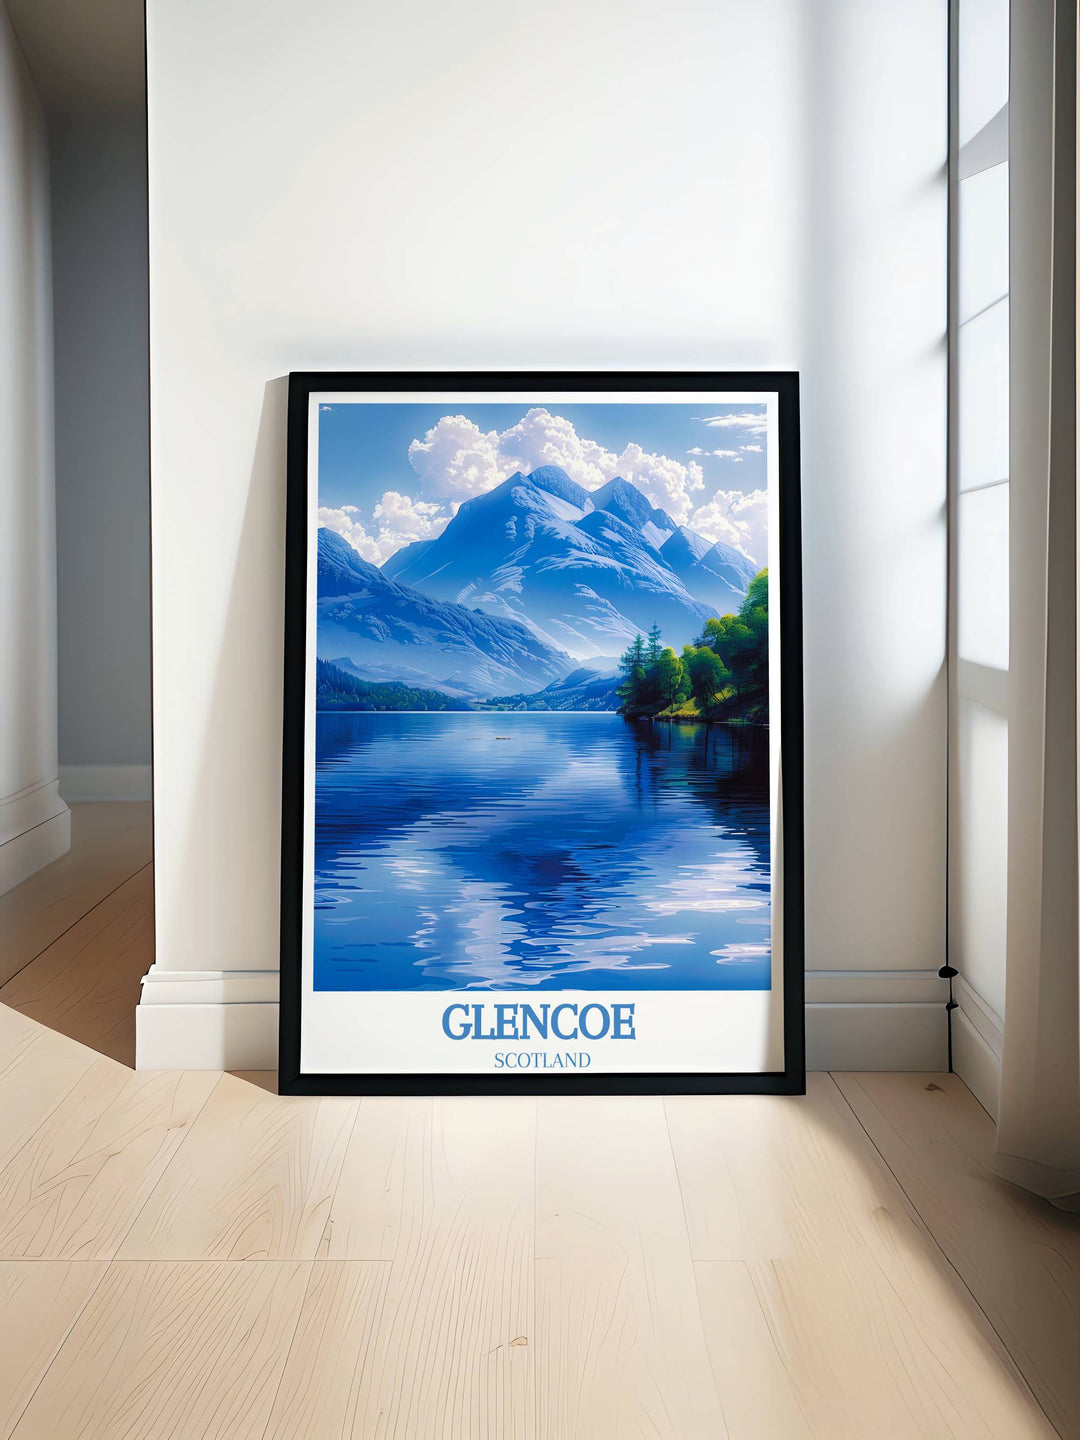 Stunning Glencoe Travel Print, a jewel in our Europe Gifts collection, captures the wild essence of Scotland, inviting wanderers to explore its beauty.